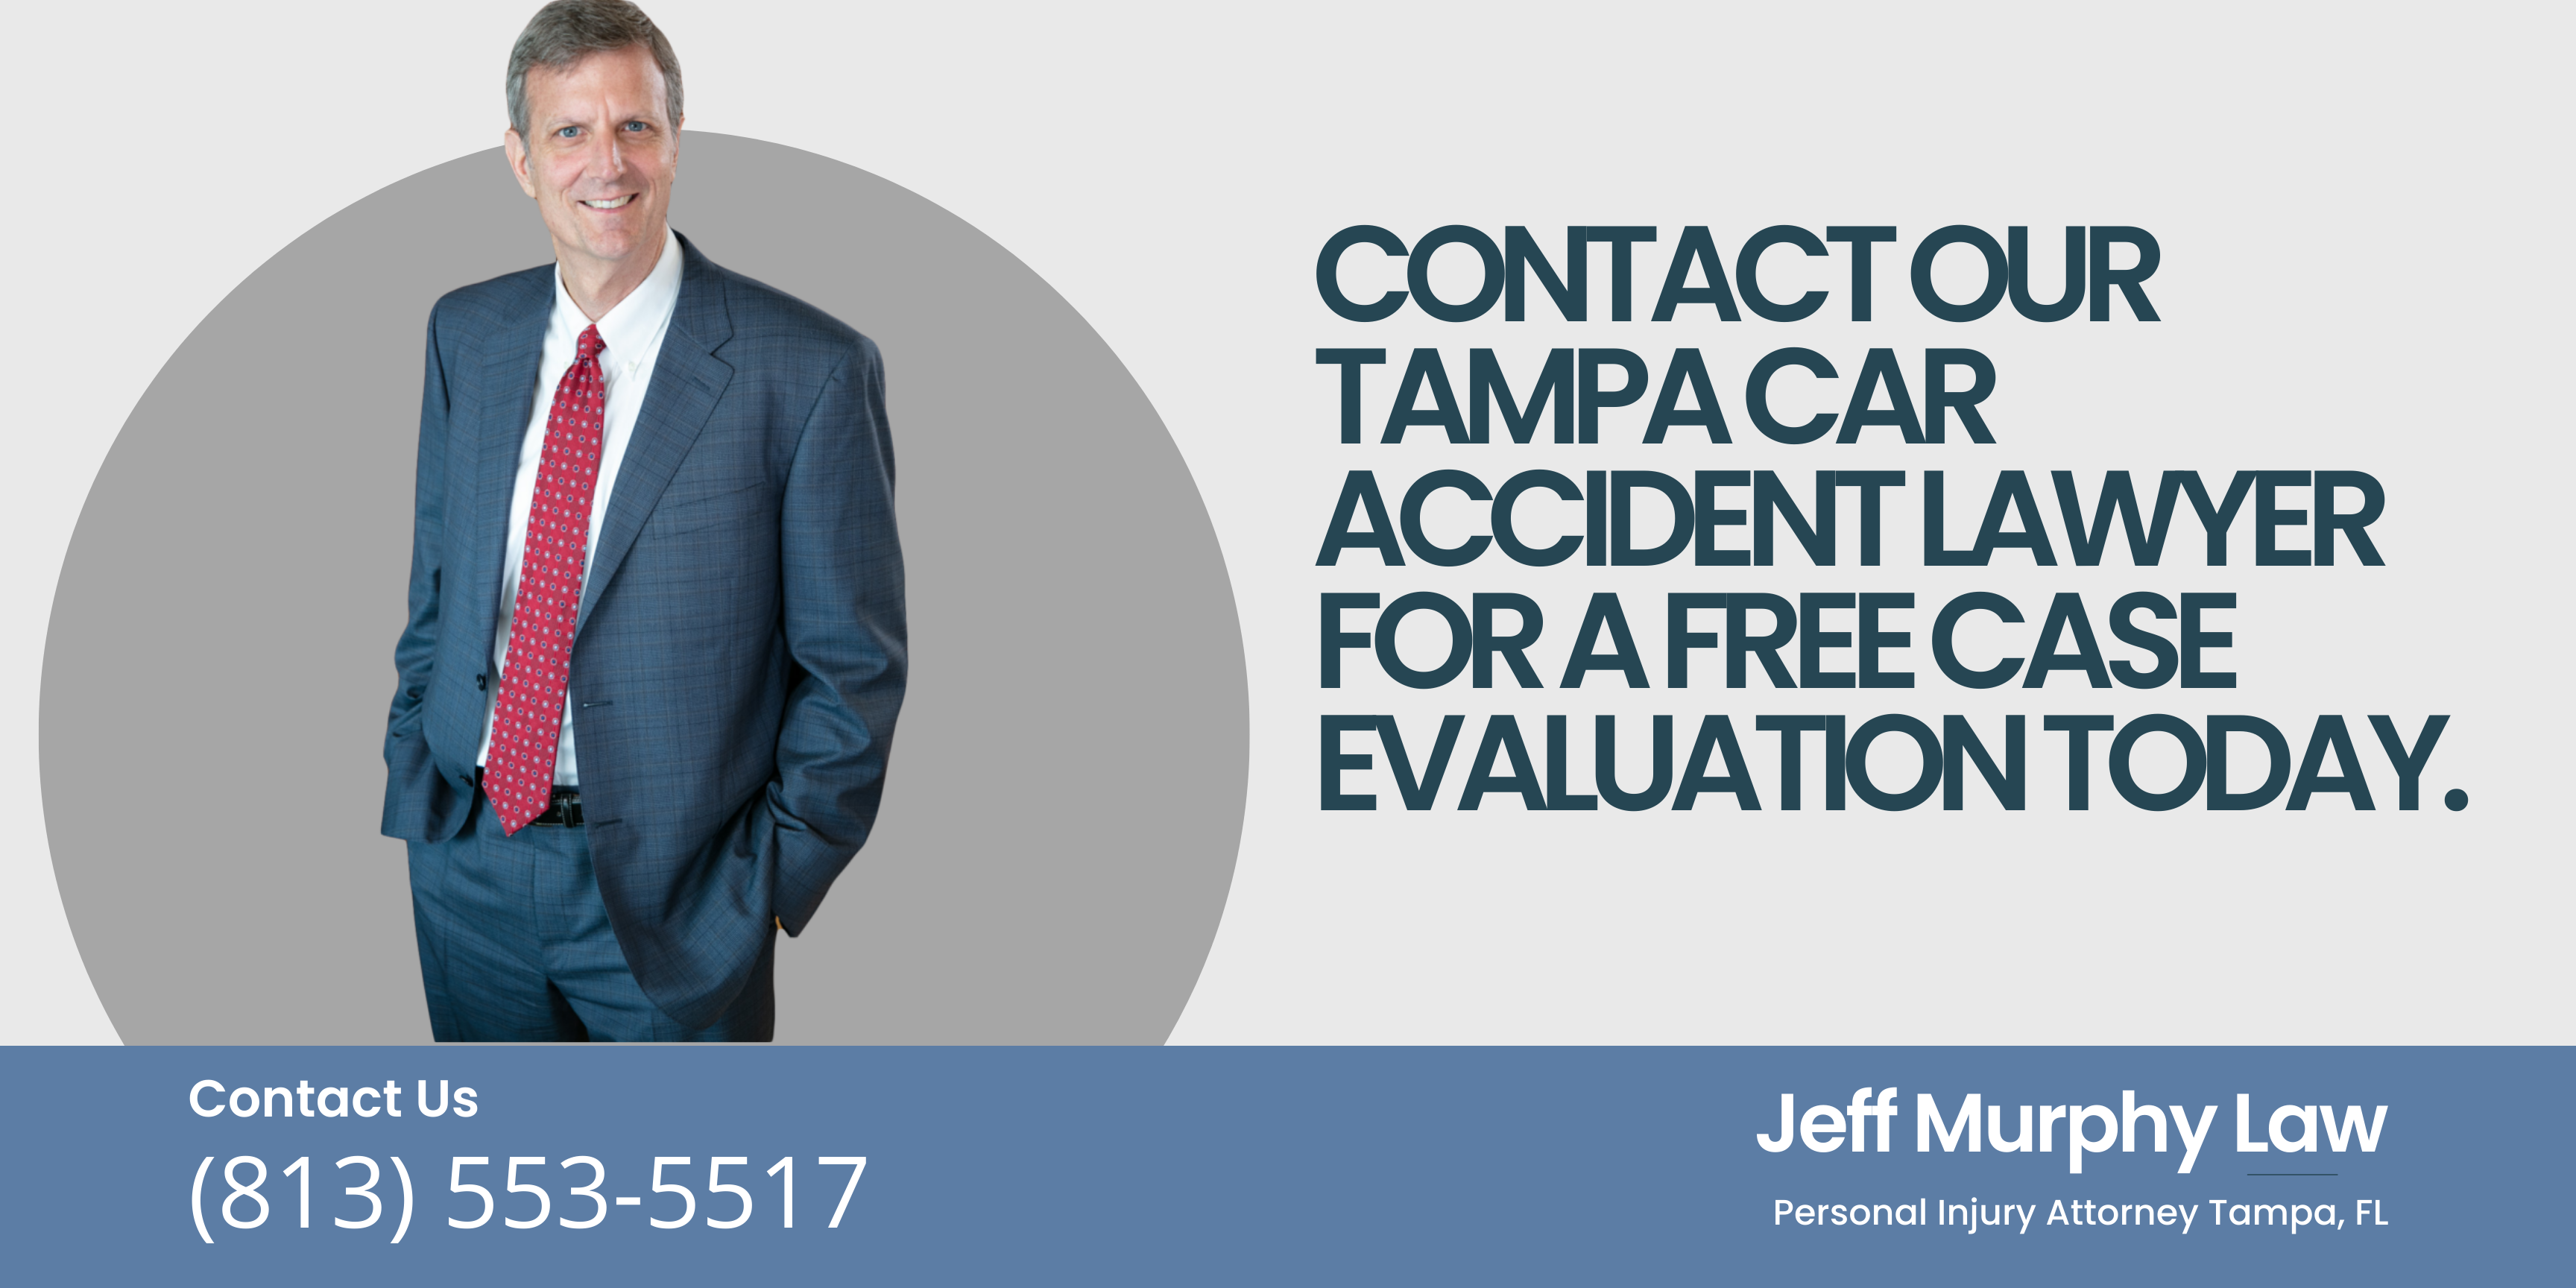 Contact our Tampa Car Accident Lawyer